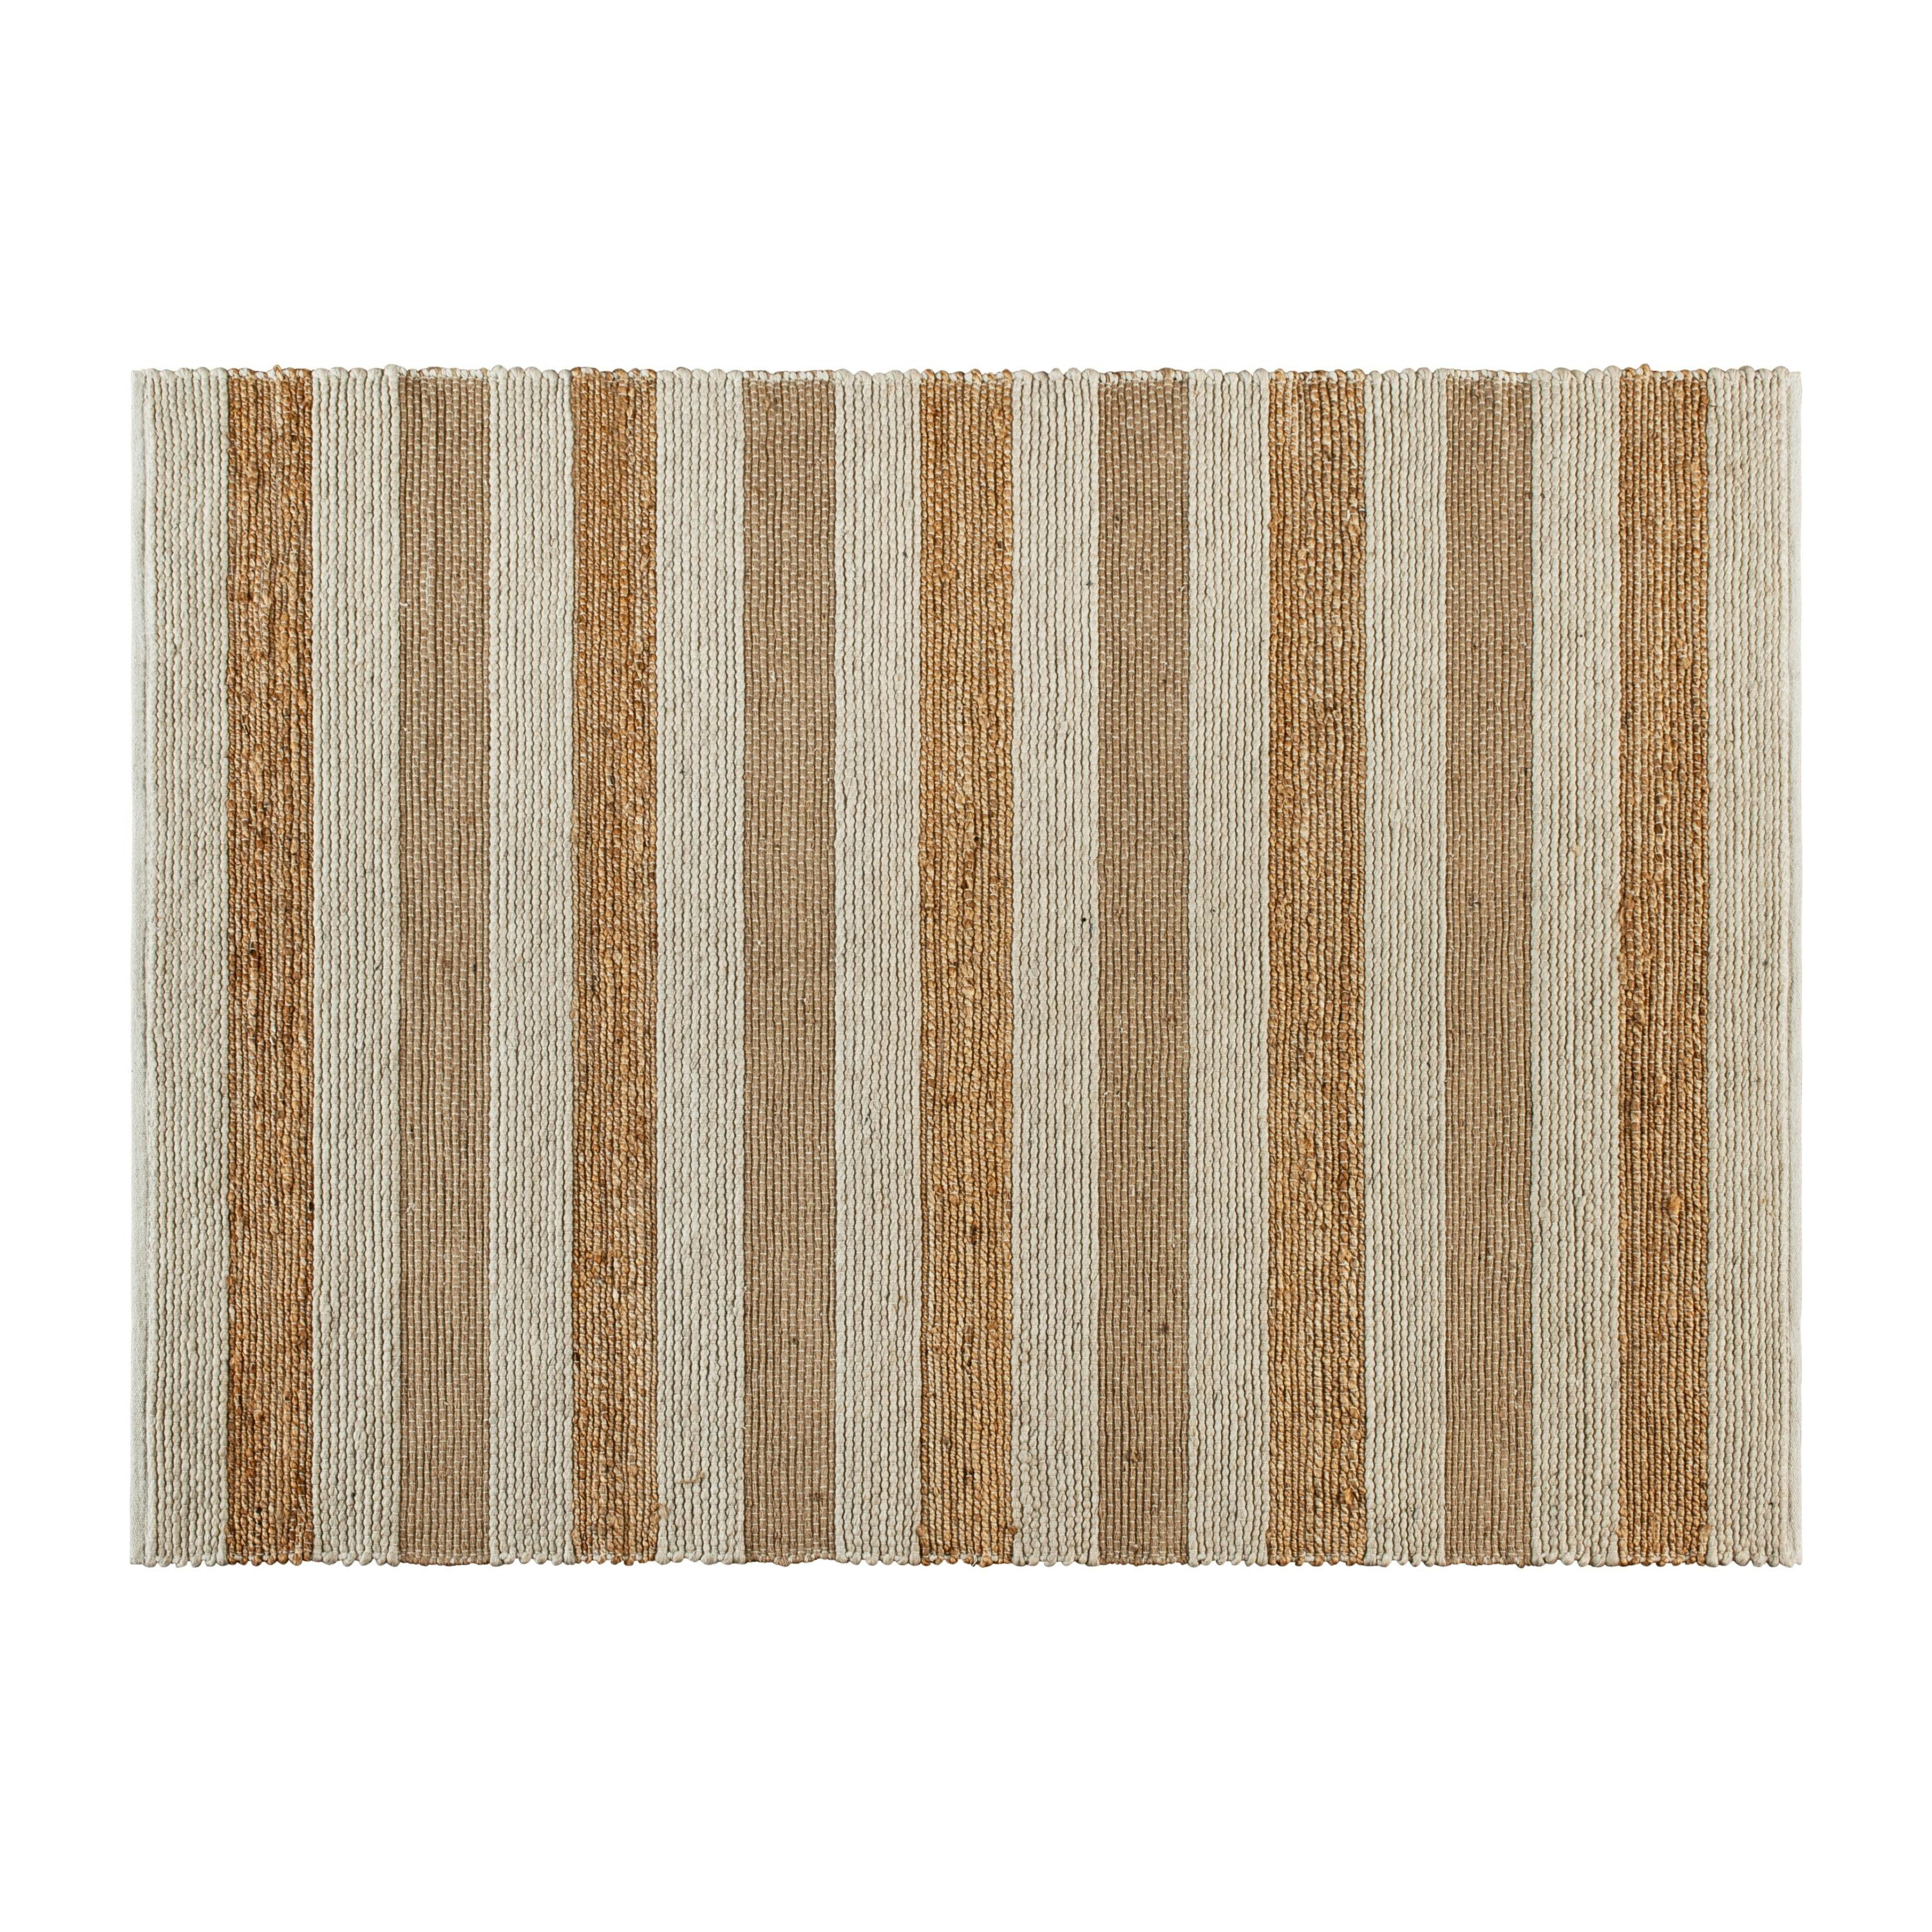 Handwoven Natural Jute Blend 5' x 7' Striped Area Rug